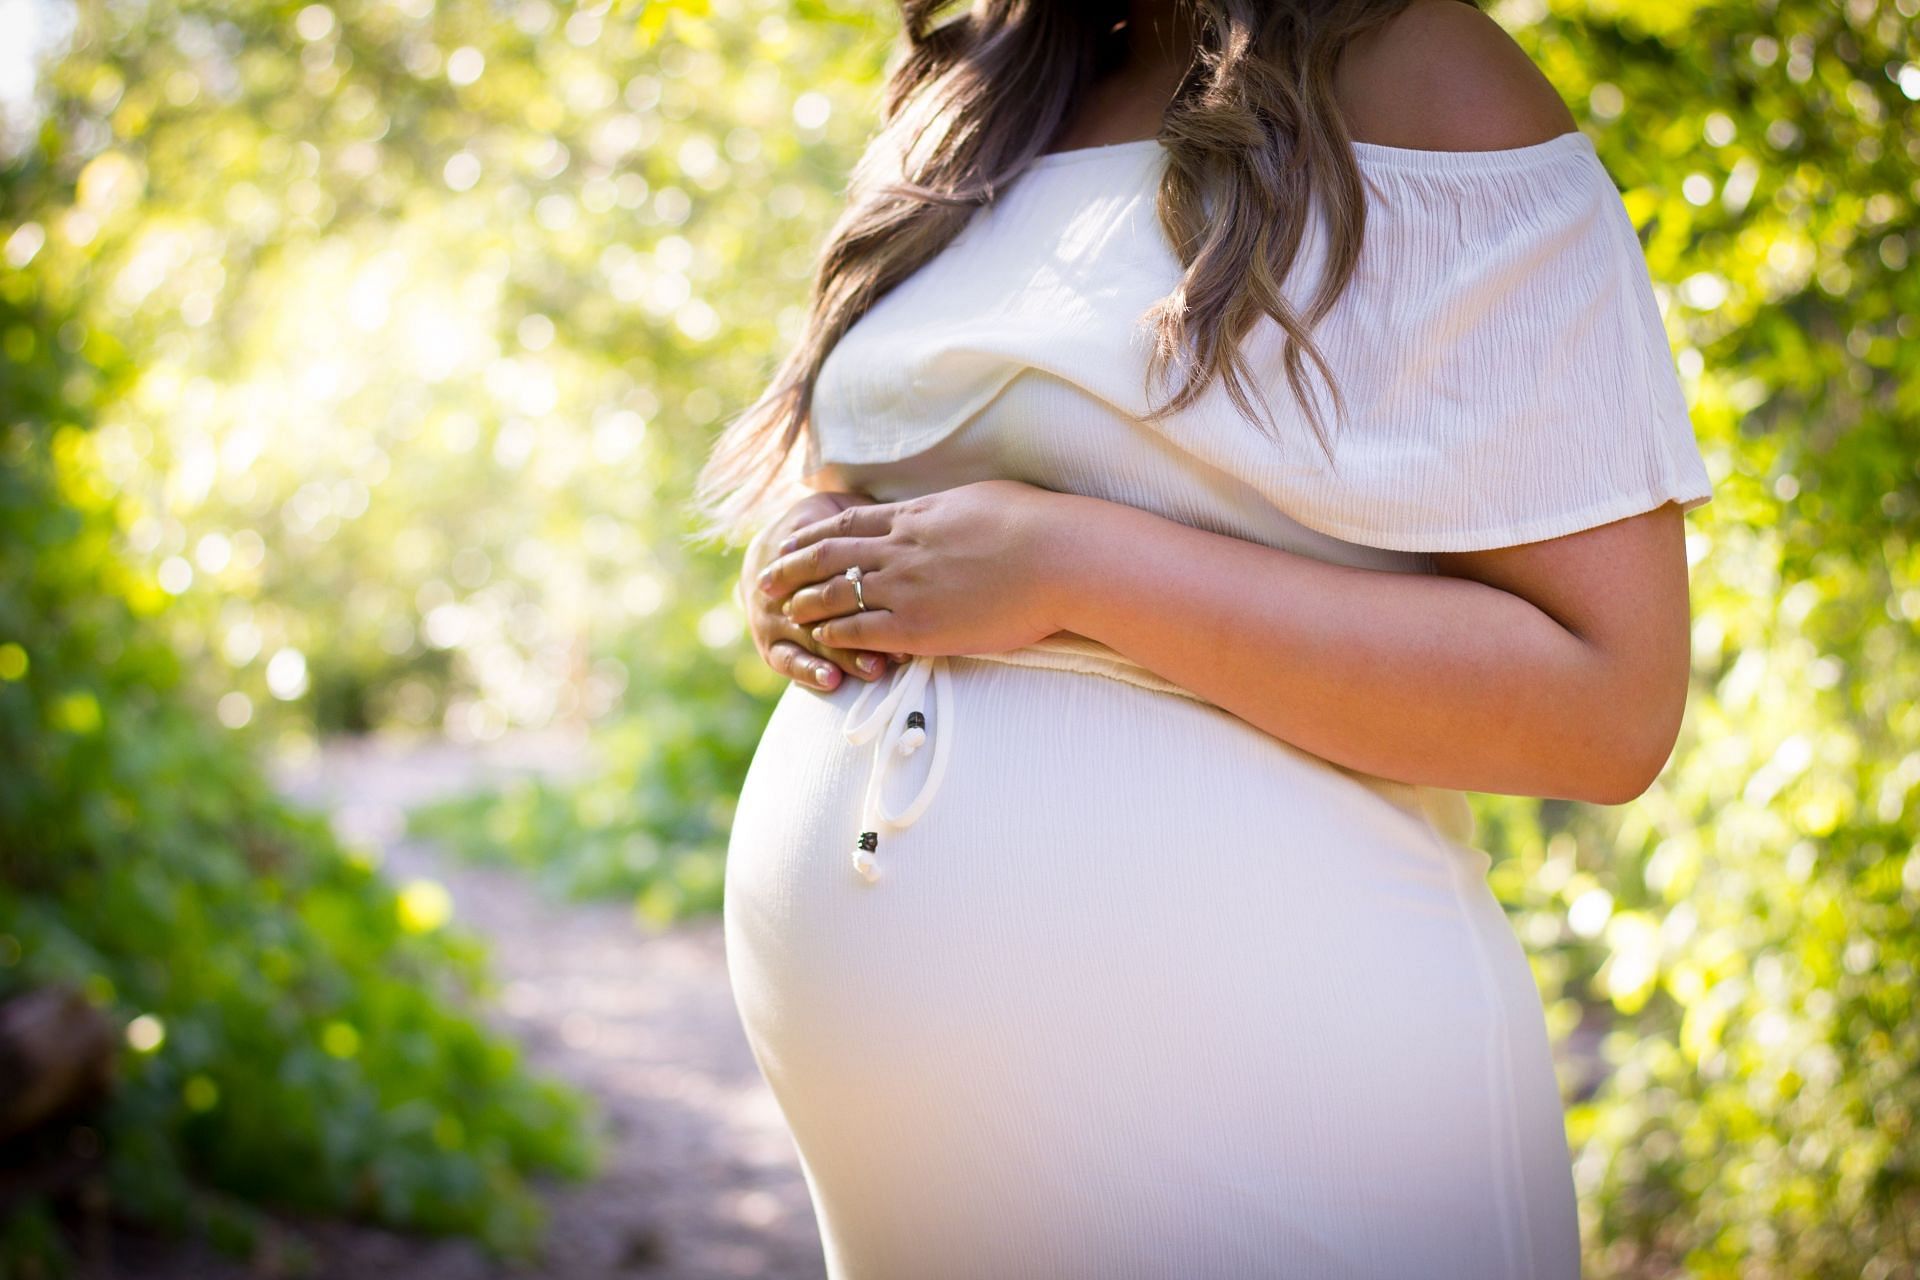 Some pregnant women may also experience frequent urination. (Image via Unsplash/ Ryan Franco)